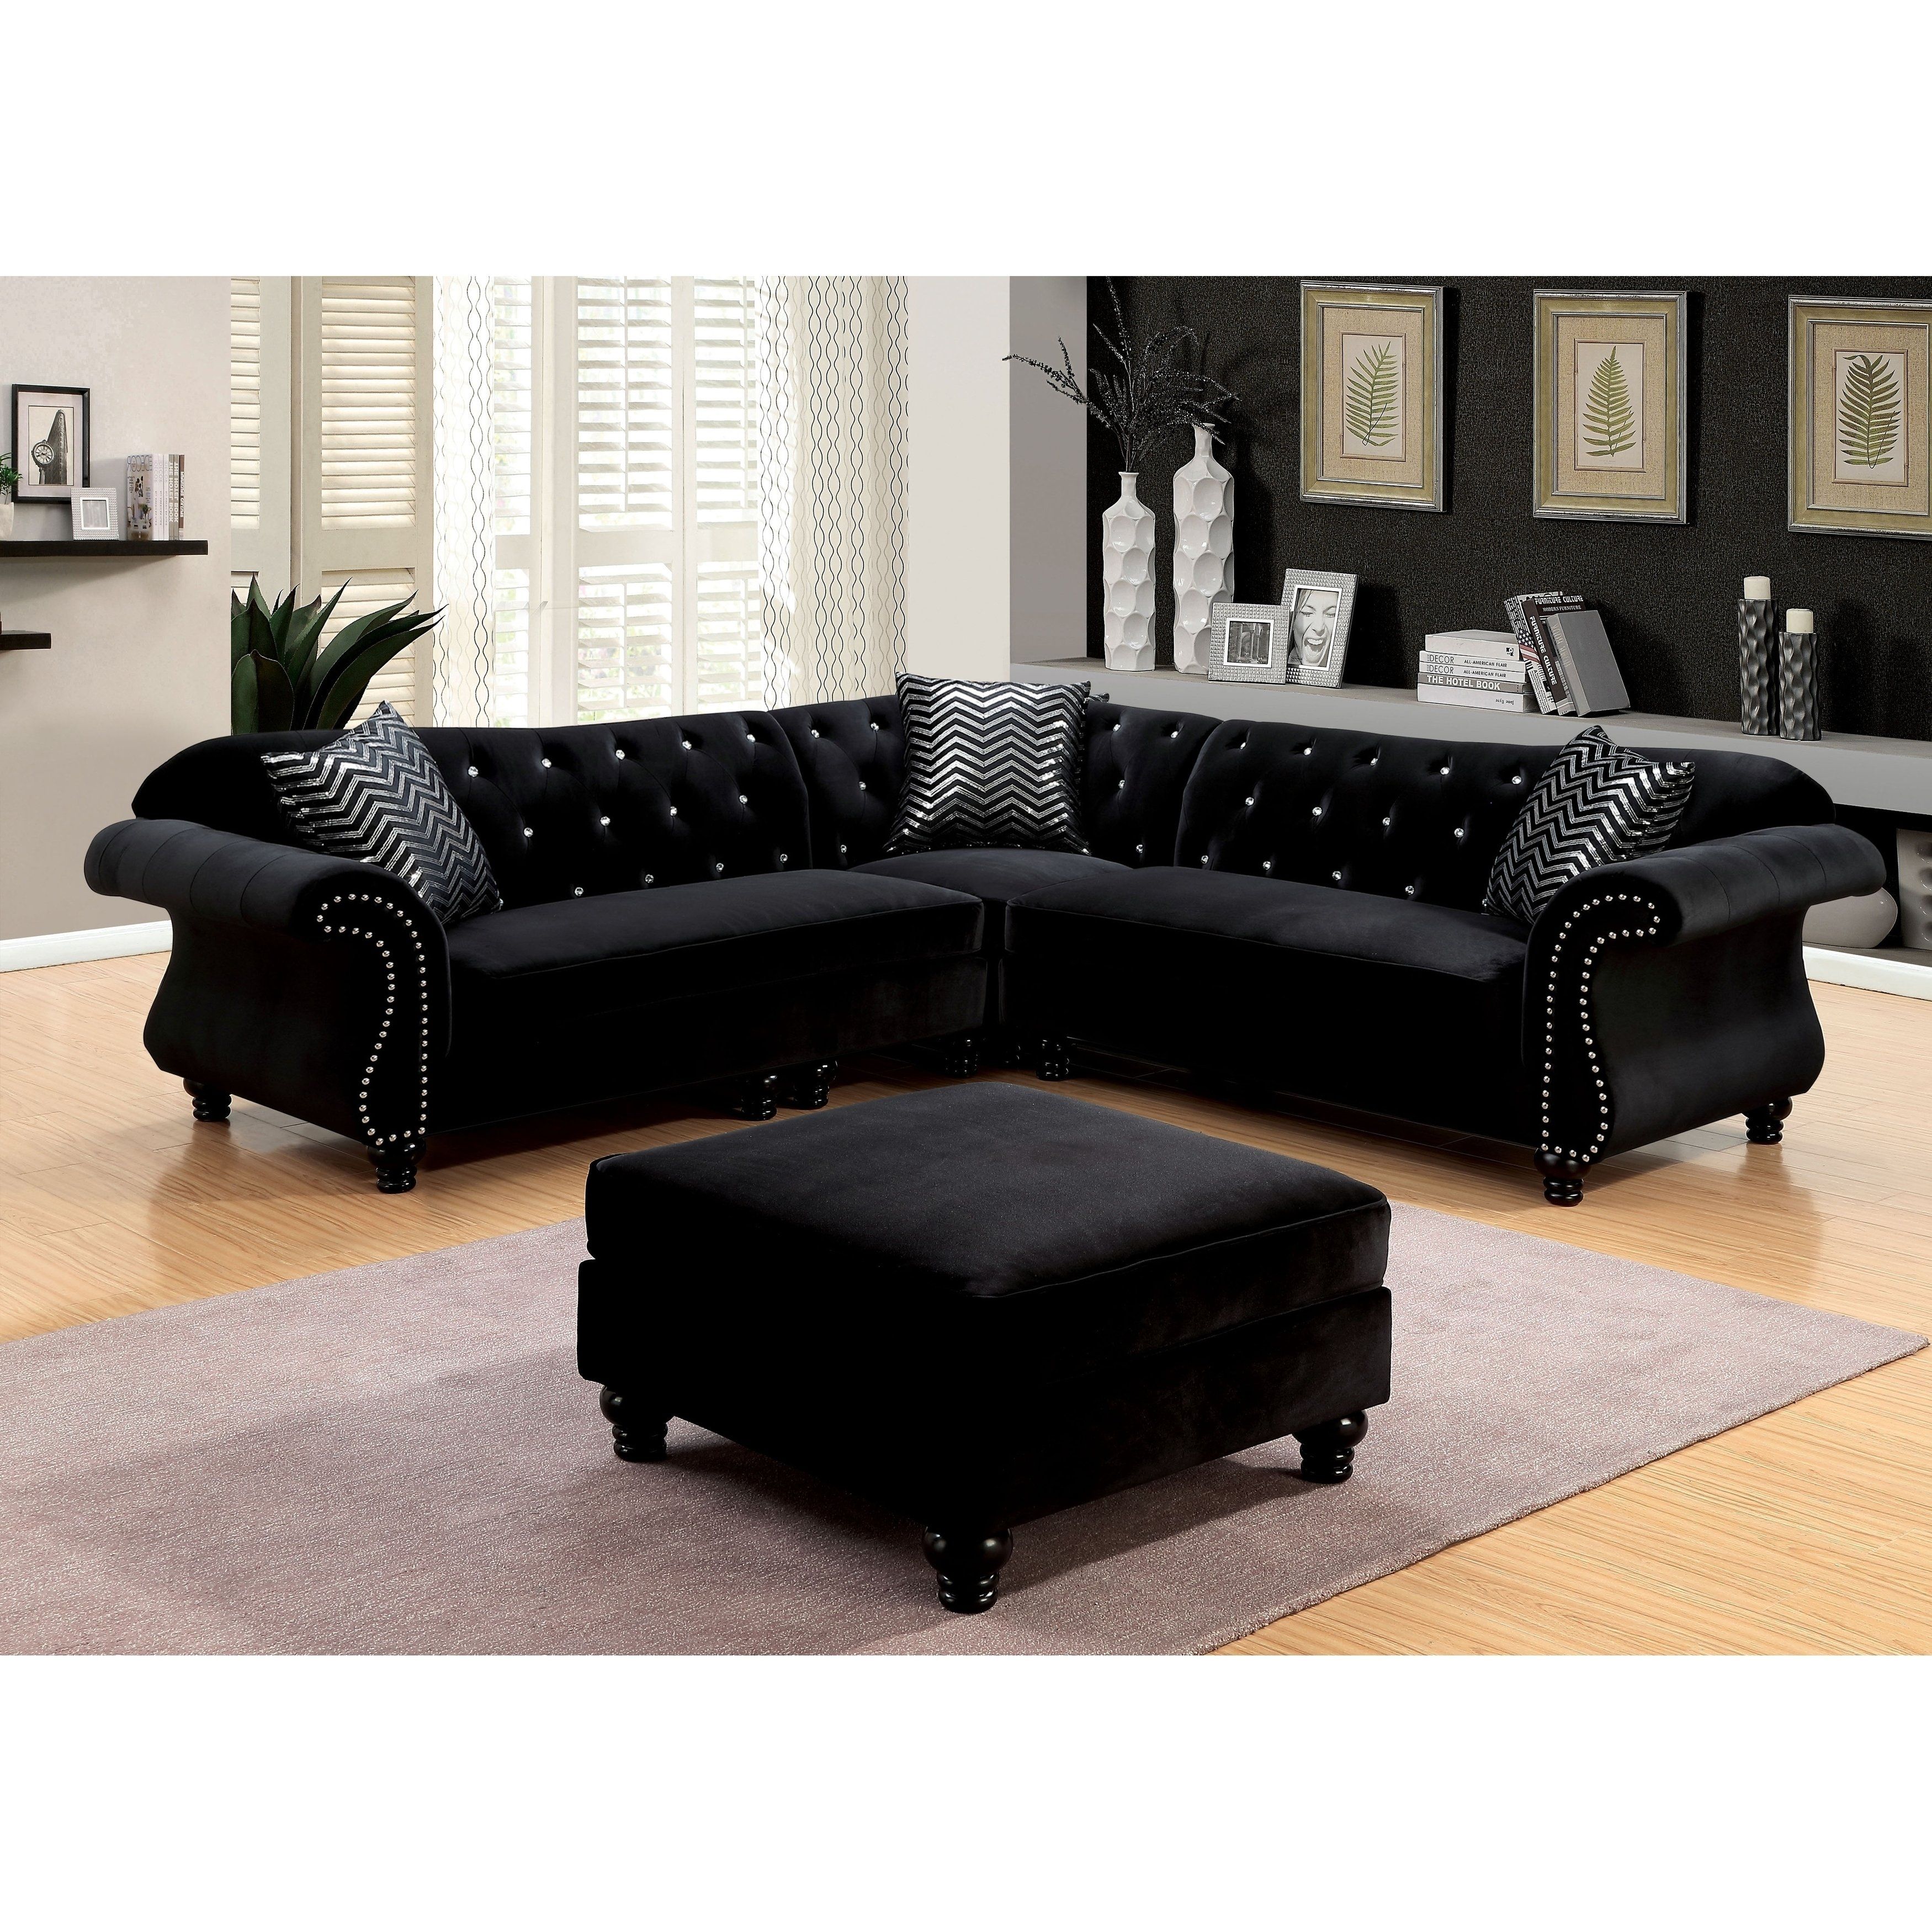 Glam Sectional Sofa | Baci Living Room Inside Glamour Ii 3 Piece Sectionals (View 19 of 25)